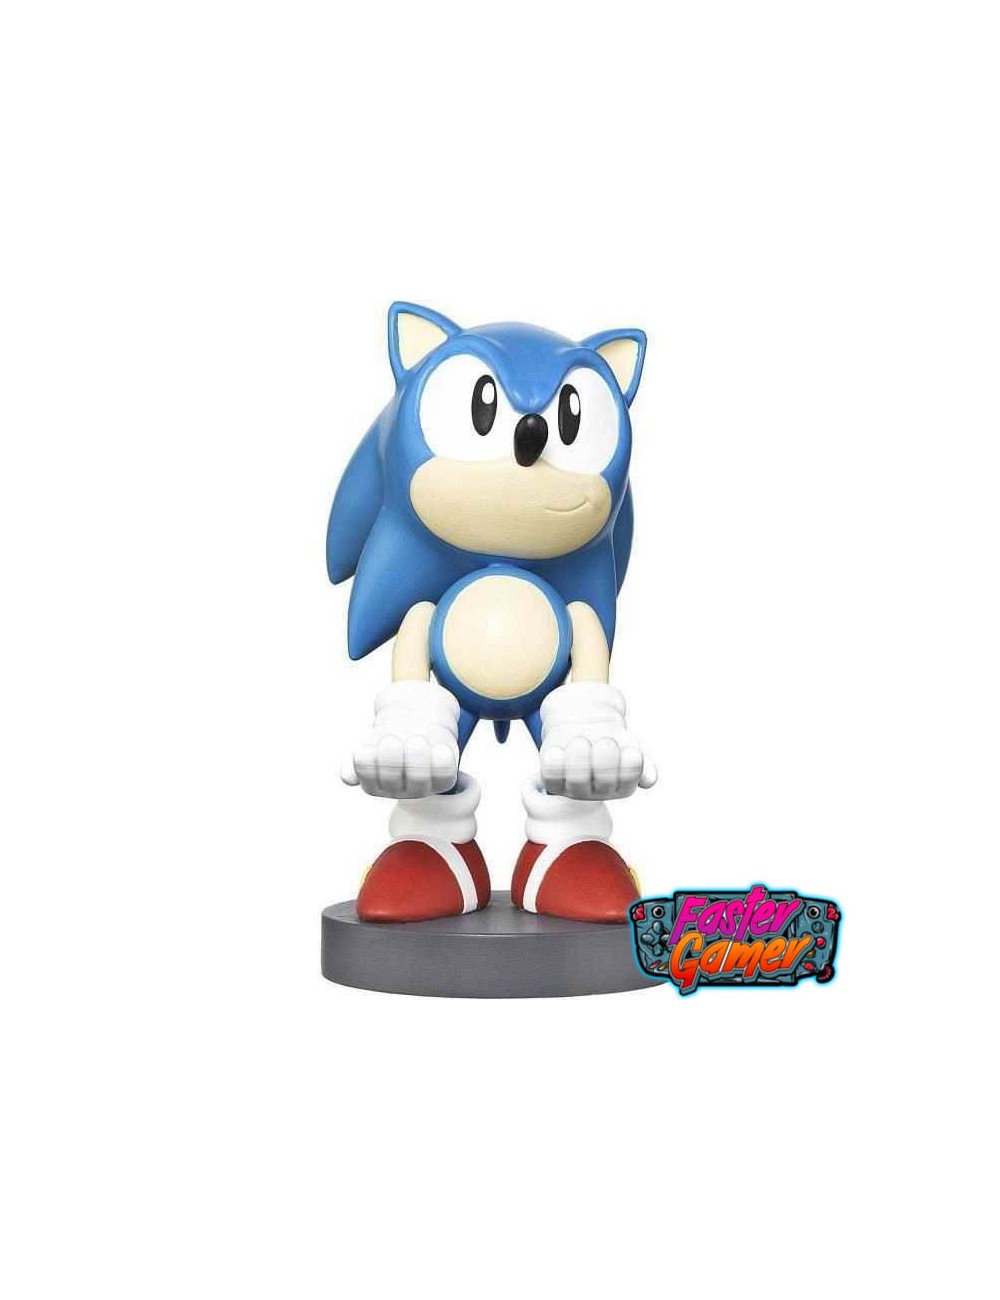 whisky Brandmand frill CABLE GUY - SONIC THE HEDGEHOG PHONE & CONTROLLER HOLDER